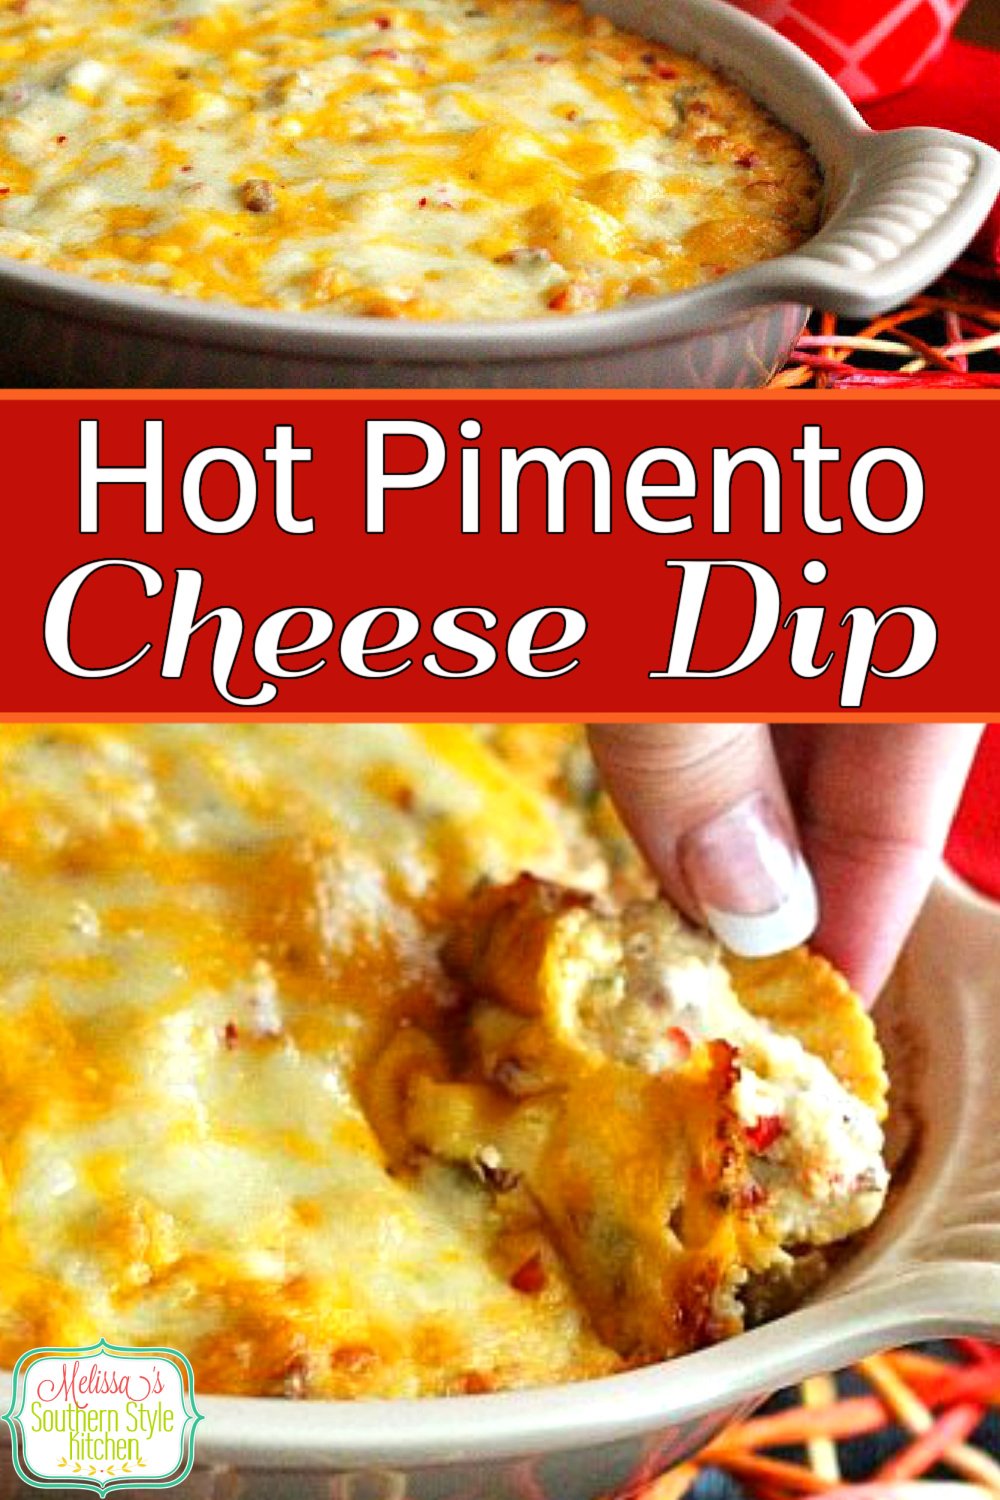 Fully Loaded Hot Pimento Cheese Dip takes a Southern classic to another level. Serve with crackers or corn chips for dipping. #pimentocheesedip #pimientocheese #southernpimentocheese #cheese #diprecipes #appetizers #dips #southernfood #southernrecipes #snacks via @melissasssk